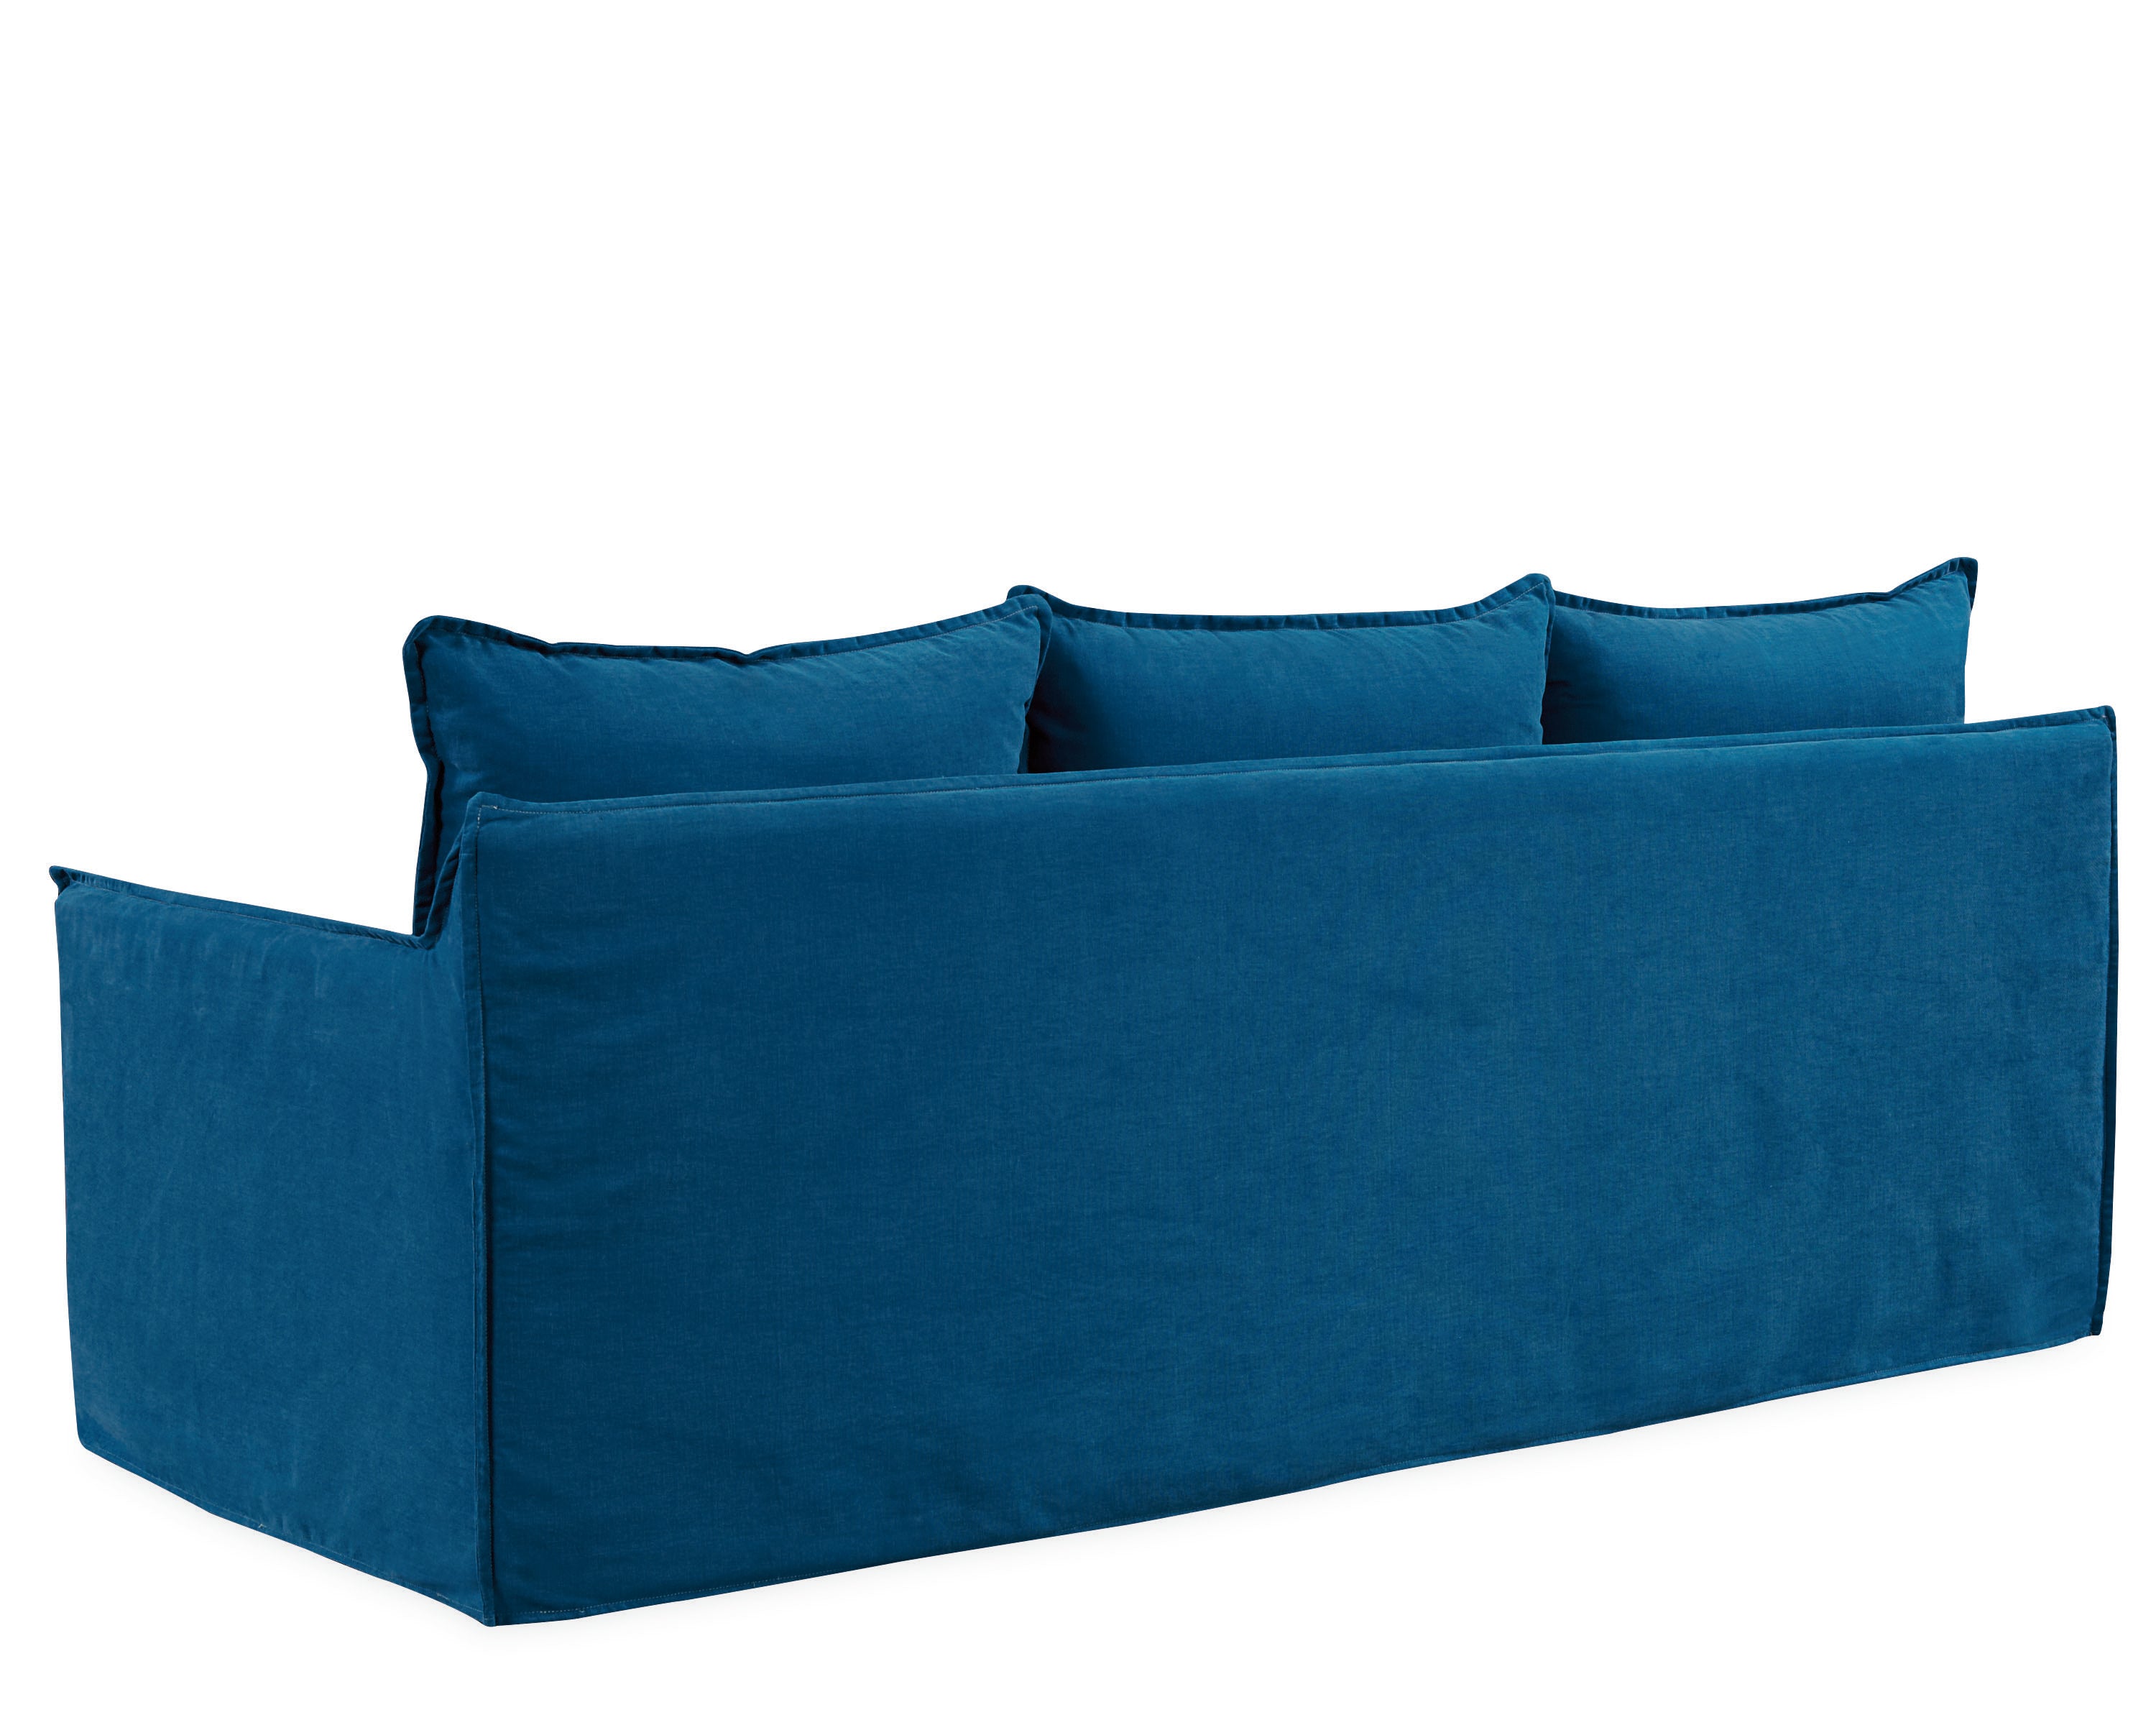 back view of sofa with three seating cushions in blue fabric option